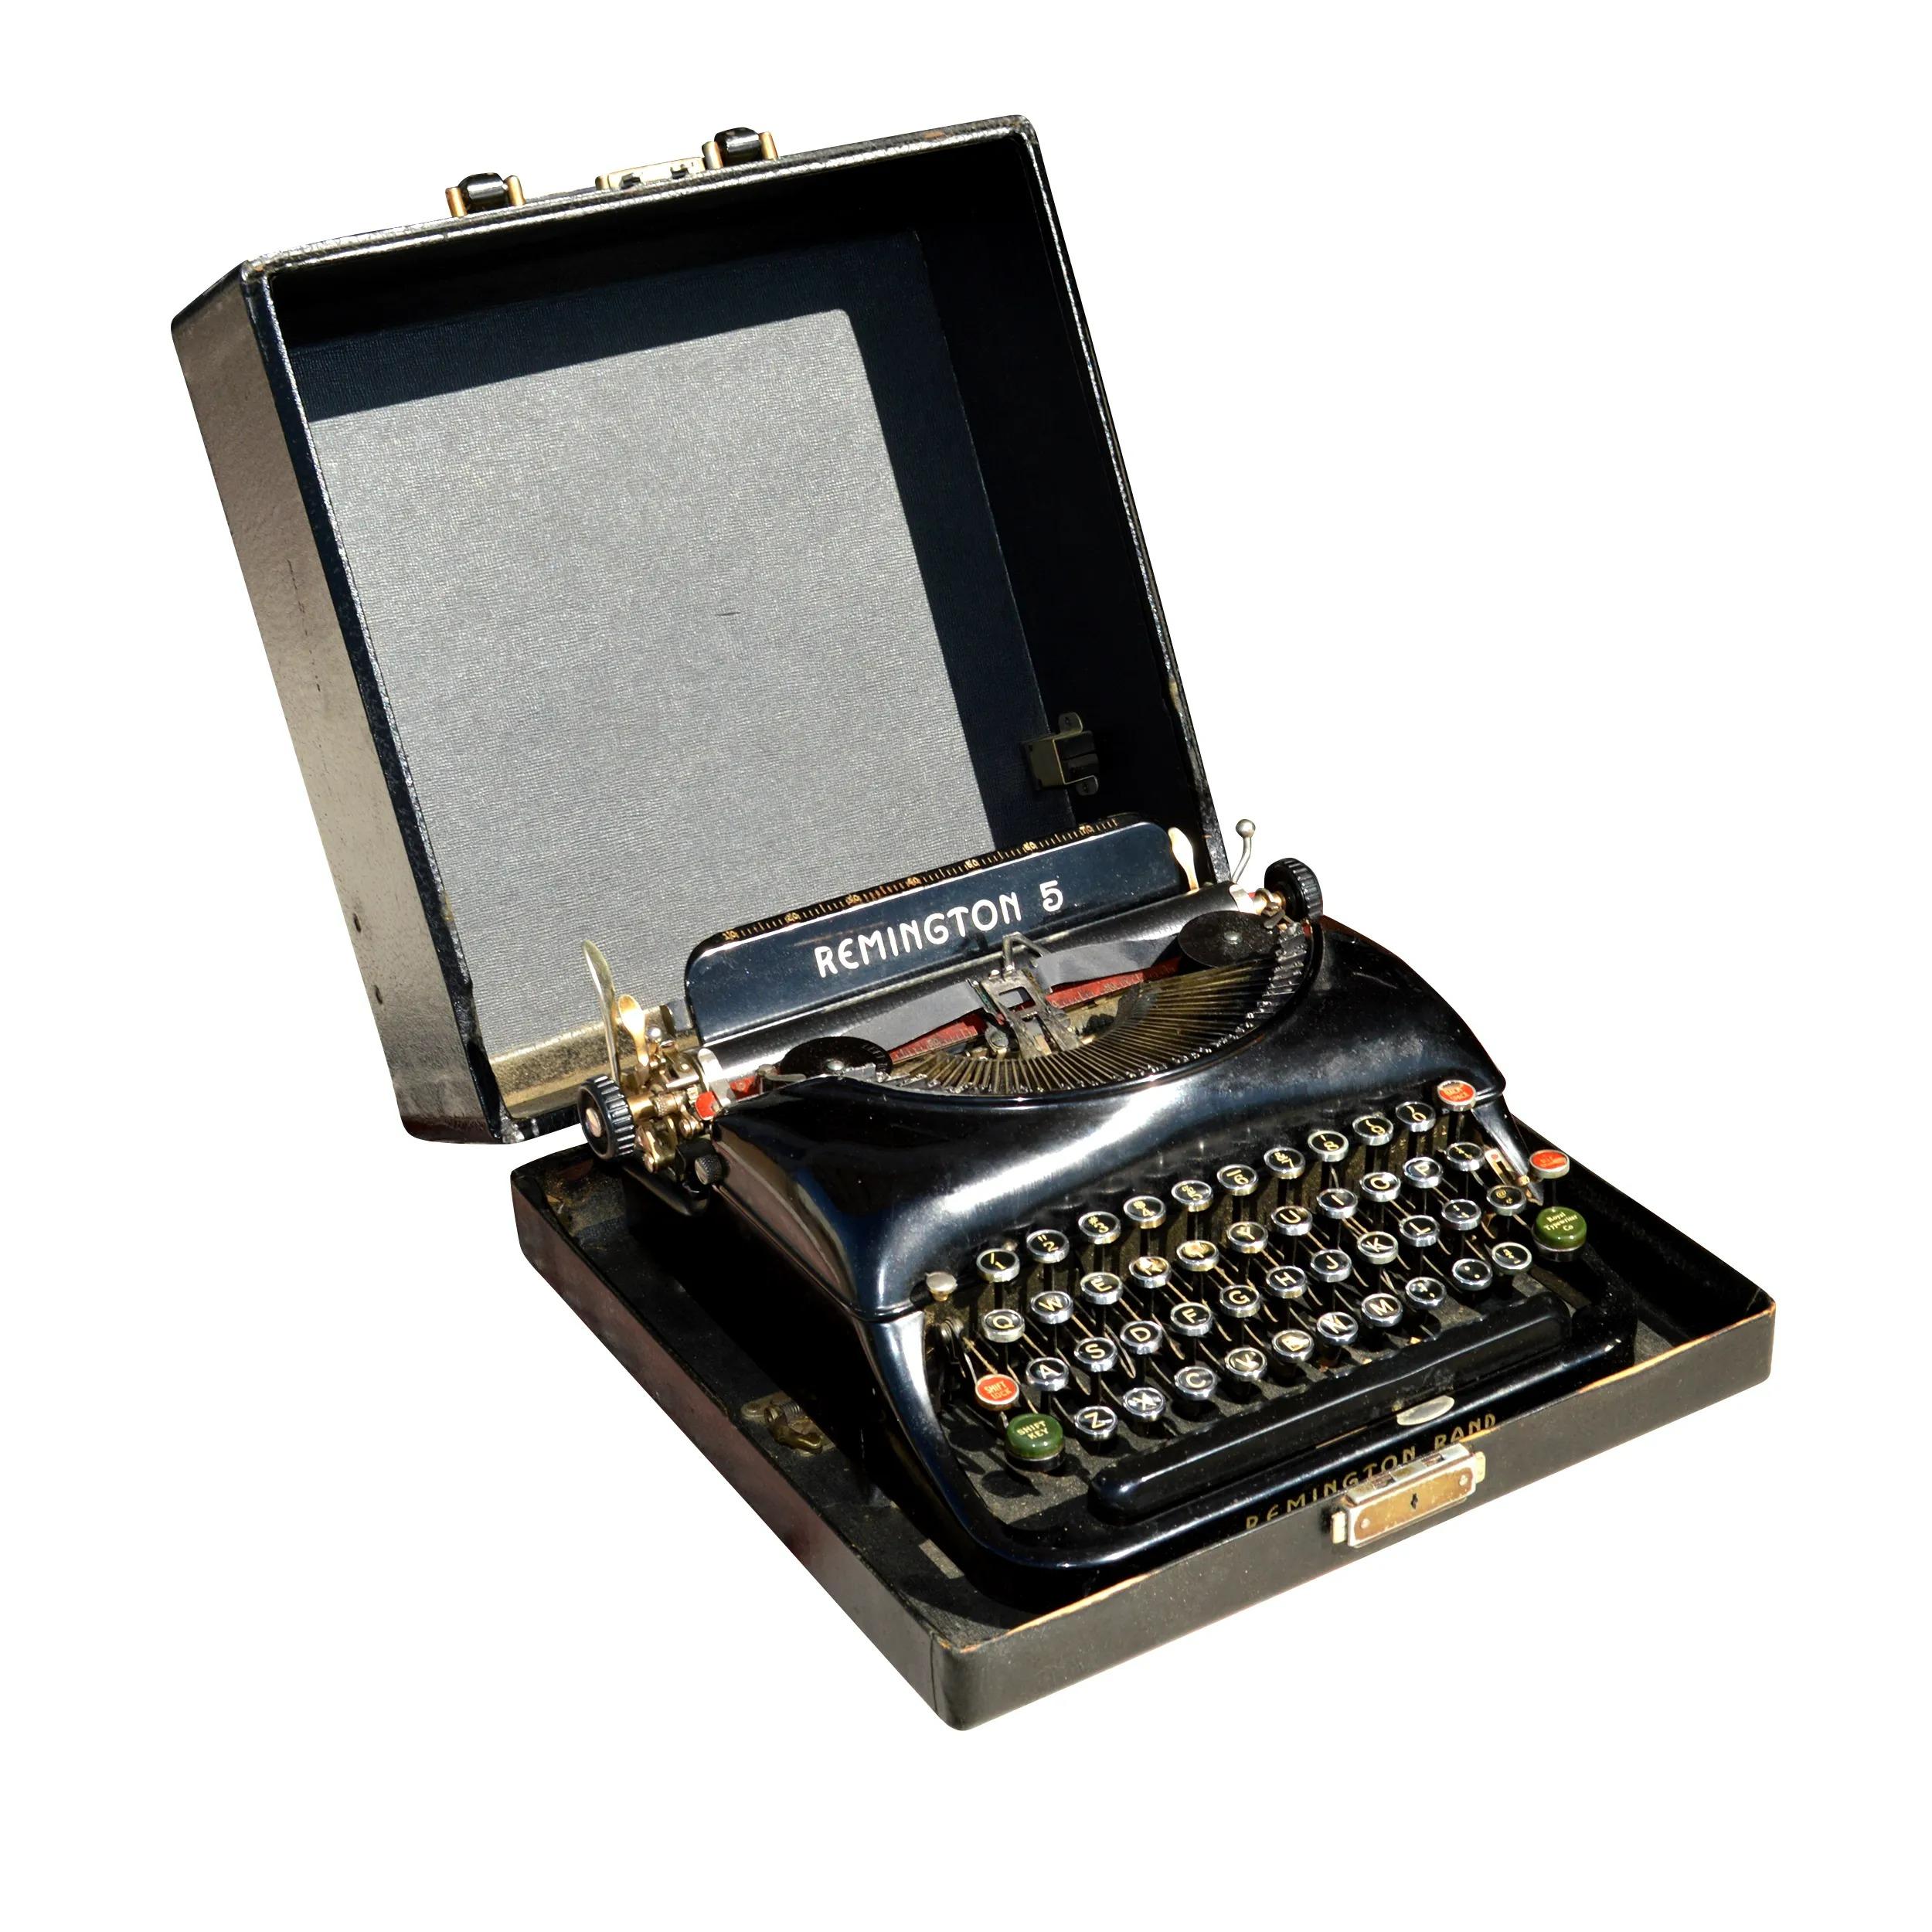 Vintage Remington Rand model 5 typewriter with portable carrying case.

This Remington Rand 5 streamlined portable typewriter was built in the 1940s and features a hard carrying case.
Typewriter is in good vintage working condition.